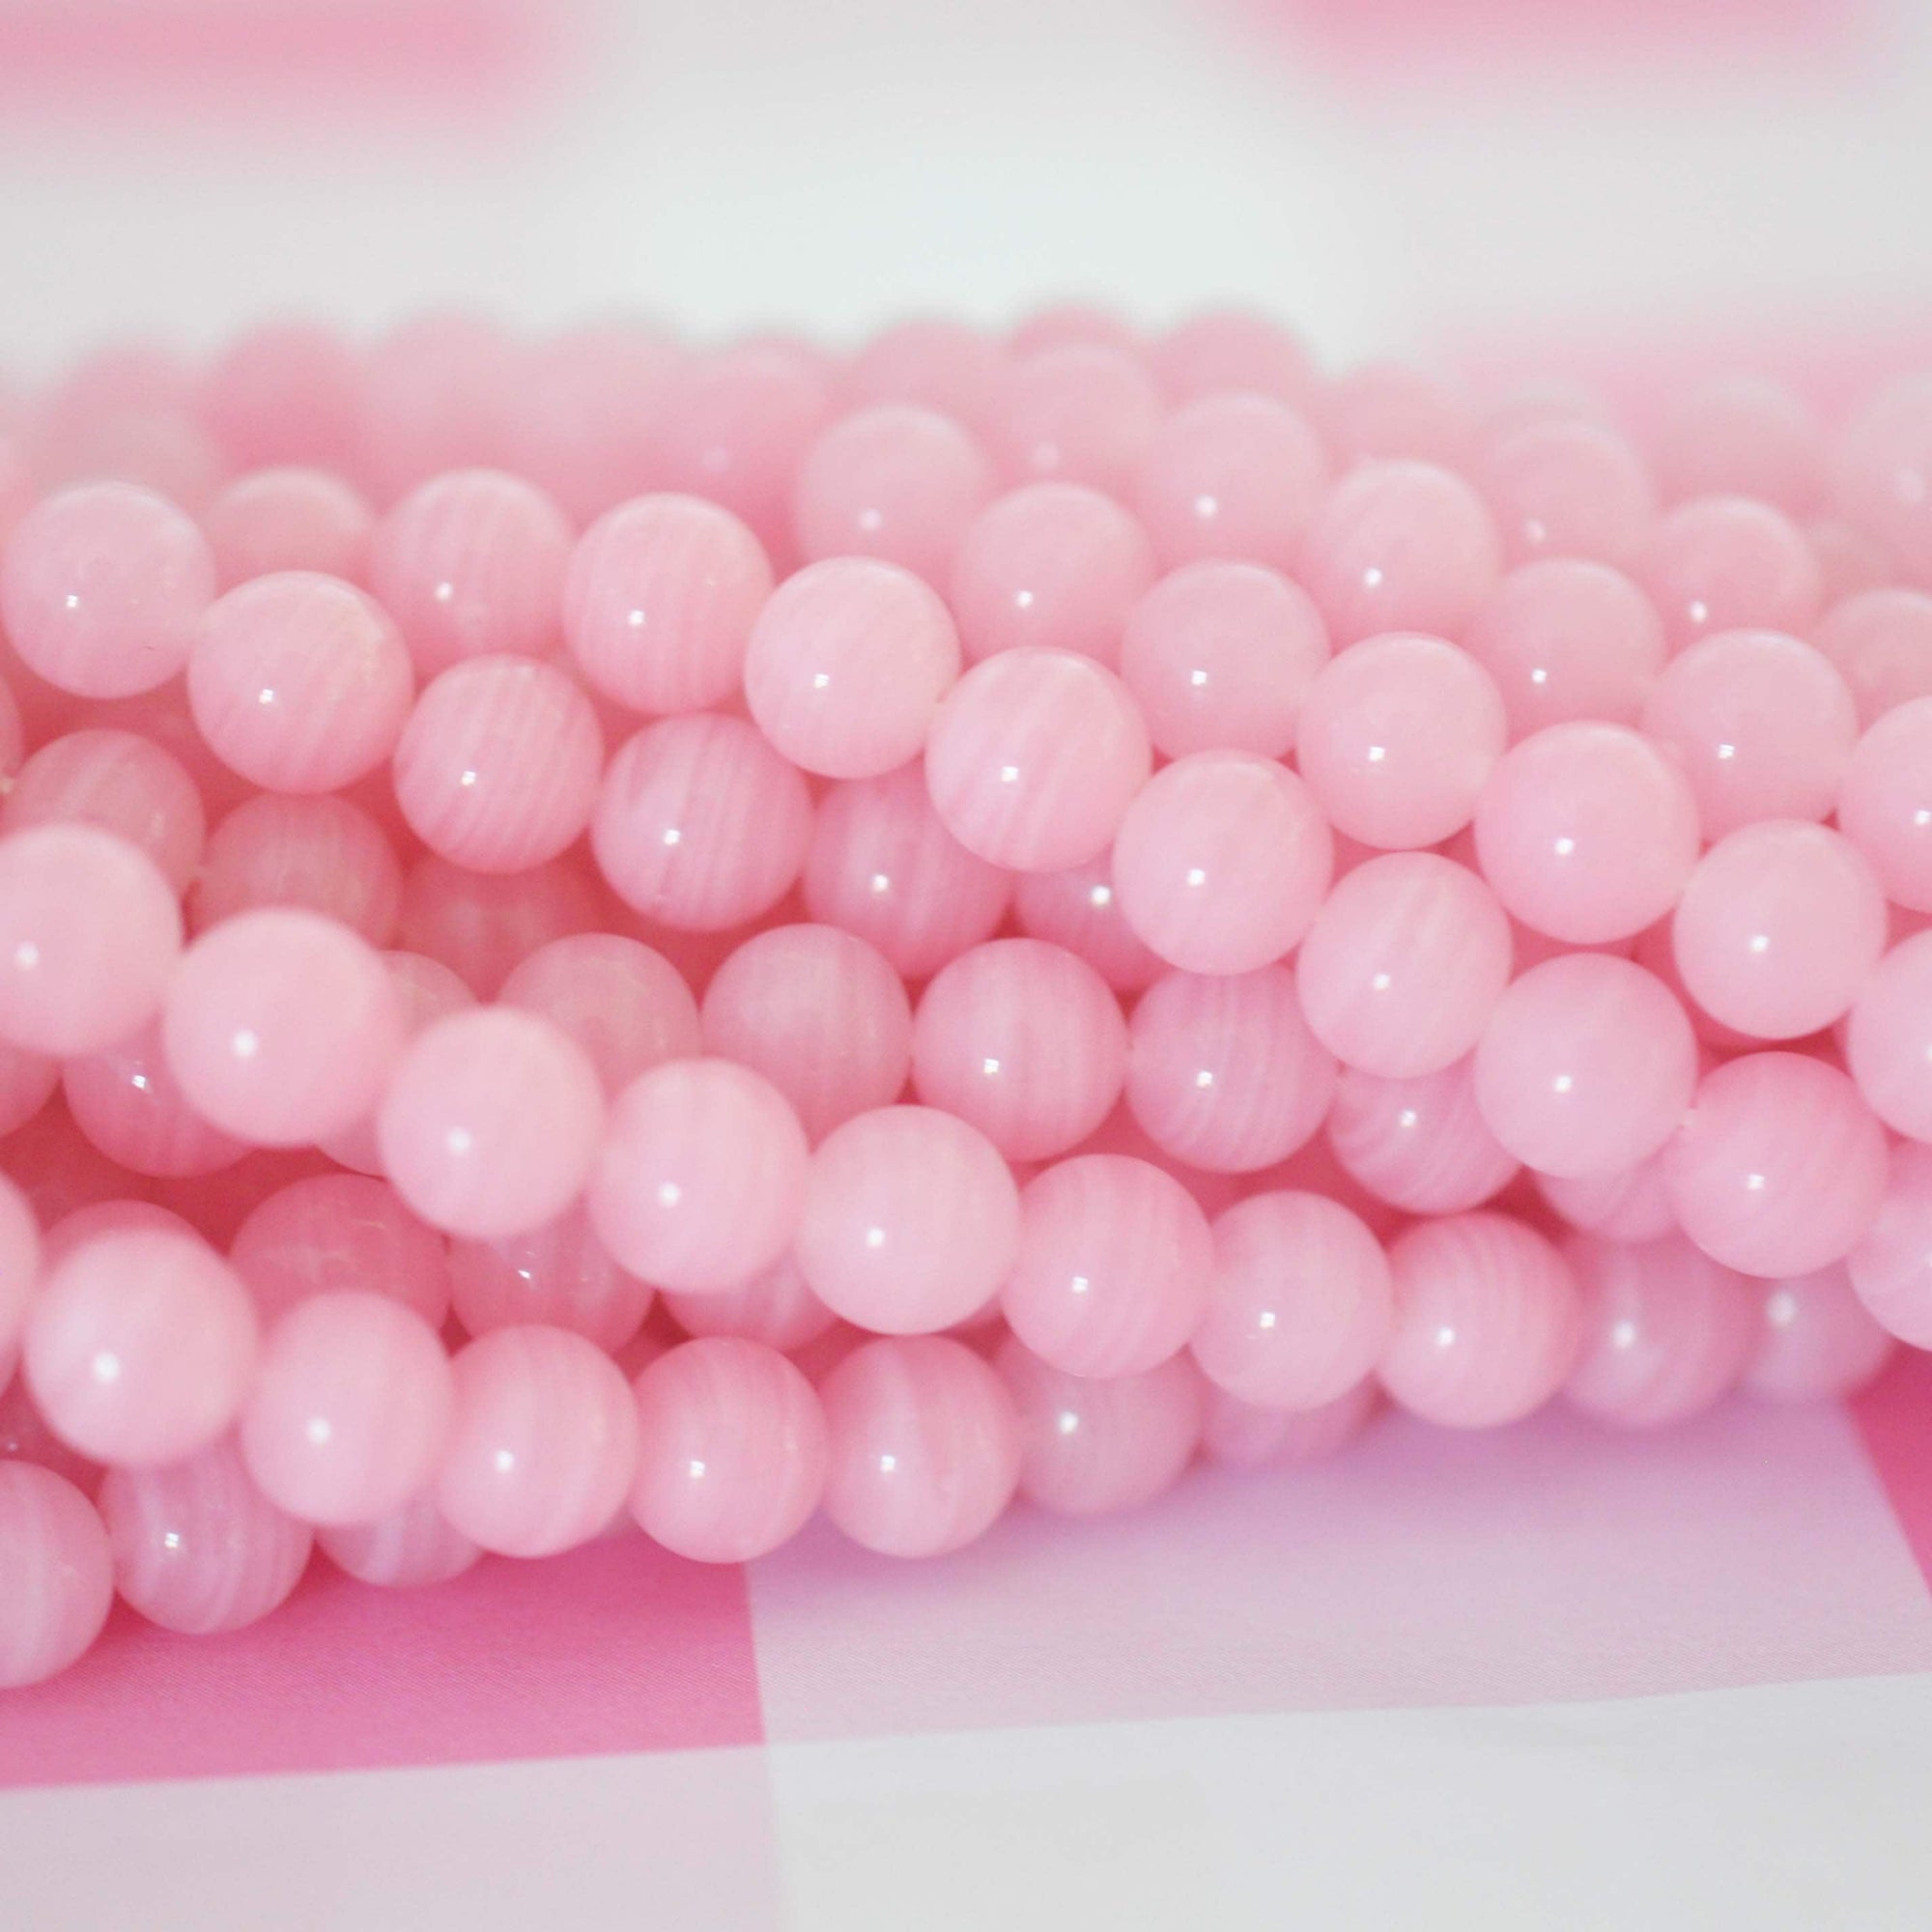 Perfectly Pink 6MM Smooth Round Vintage Cherry Brand Glass Beads - 100 Beads